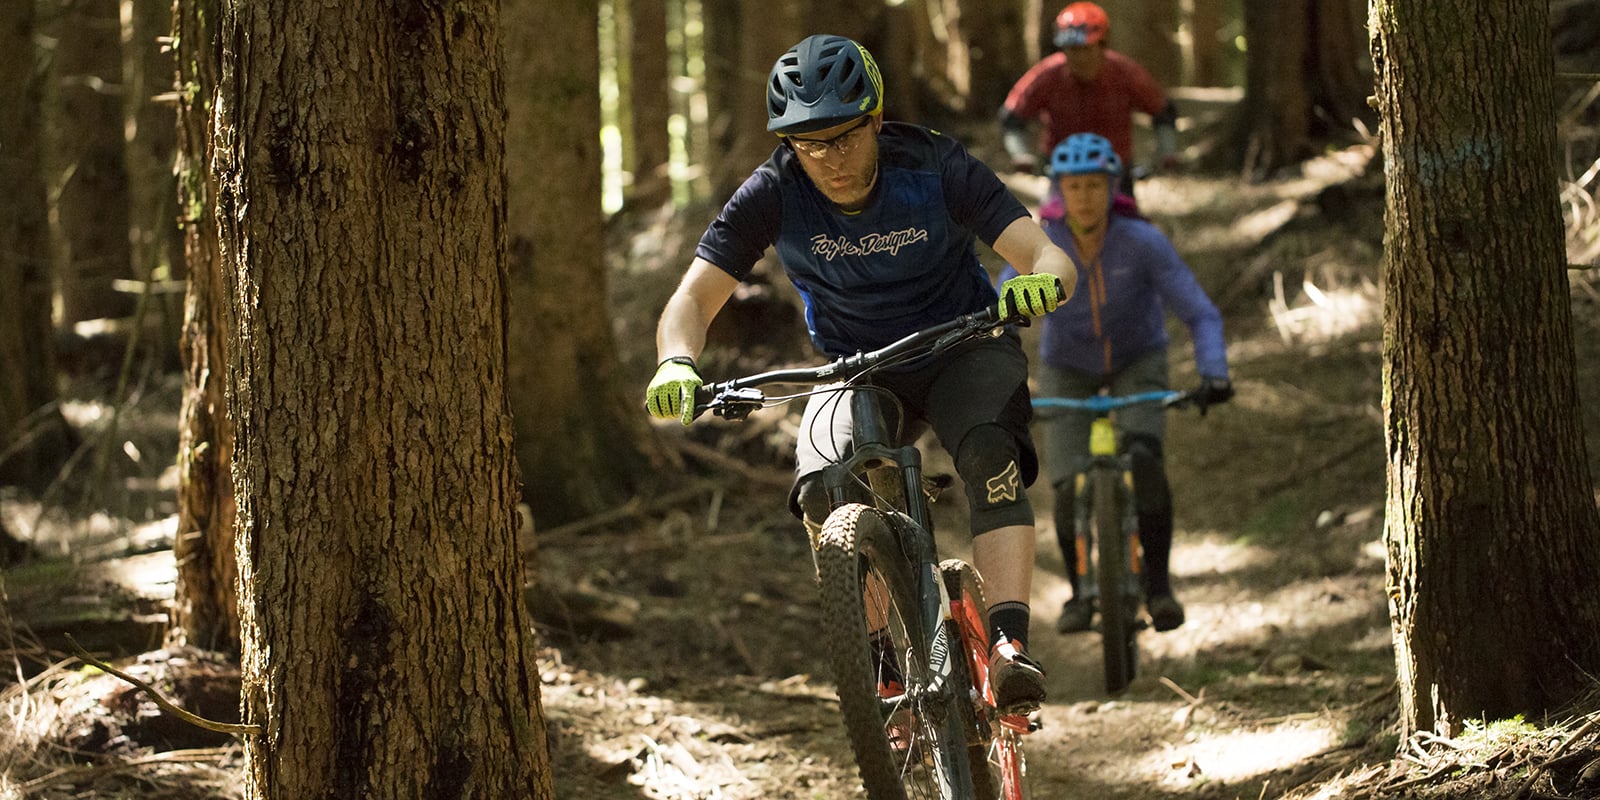 A Guide For Mountain Biking | Types Of Mountain Biking | Best Season To Go | Outfit And Gear